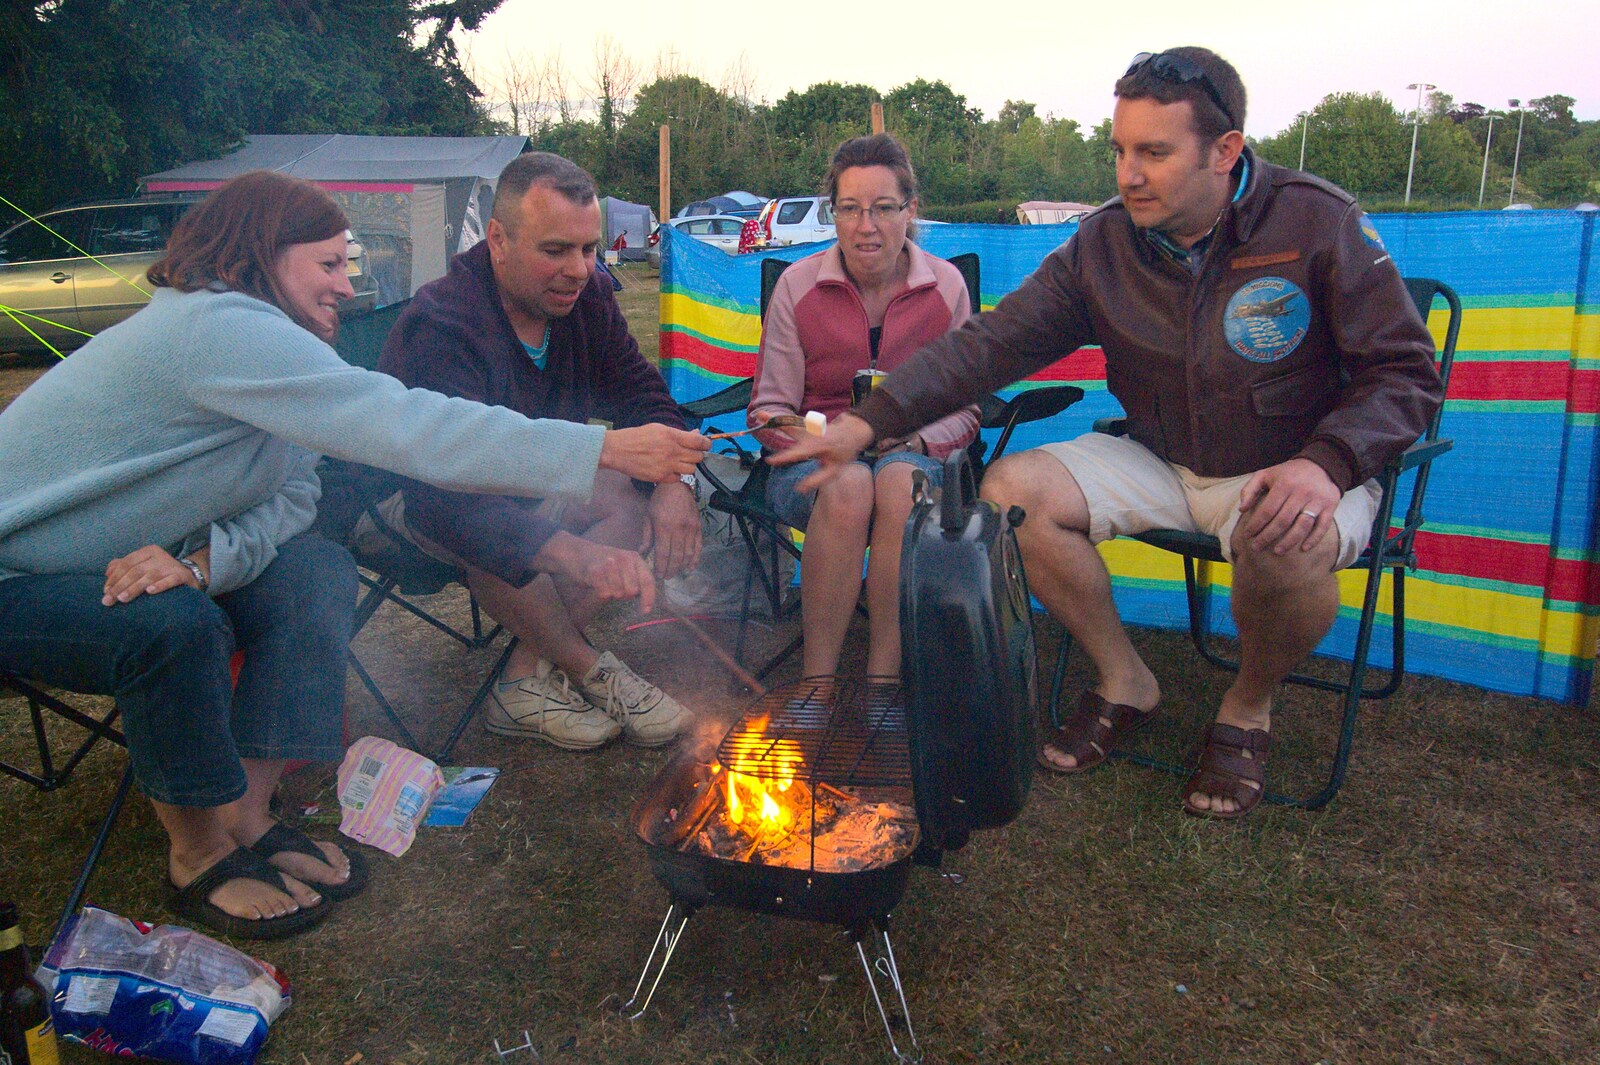 Time for marshmallow toasting from Carlton Park Camping, Saxmundham, Suffolk - 4th June 2011